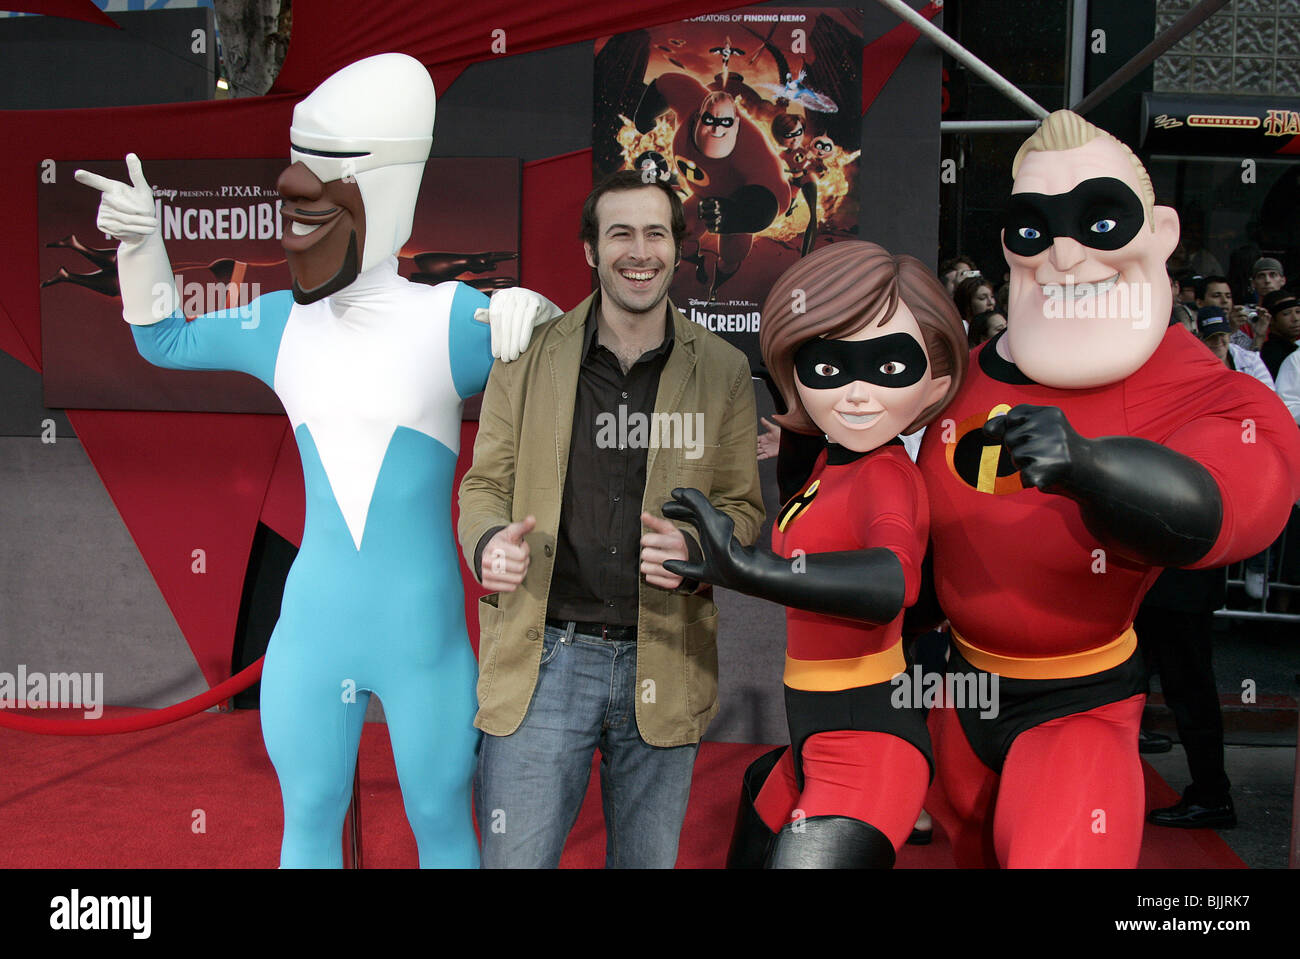 JASON LEE & THE INCREDIBLES THE INCREDIBLES WORLD PREMIER HOLLYWOOD LOS ANGELES USA 24 October 2004 Stock Photo